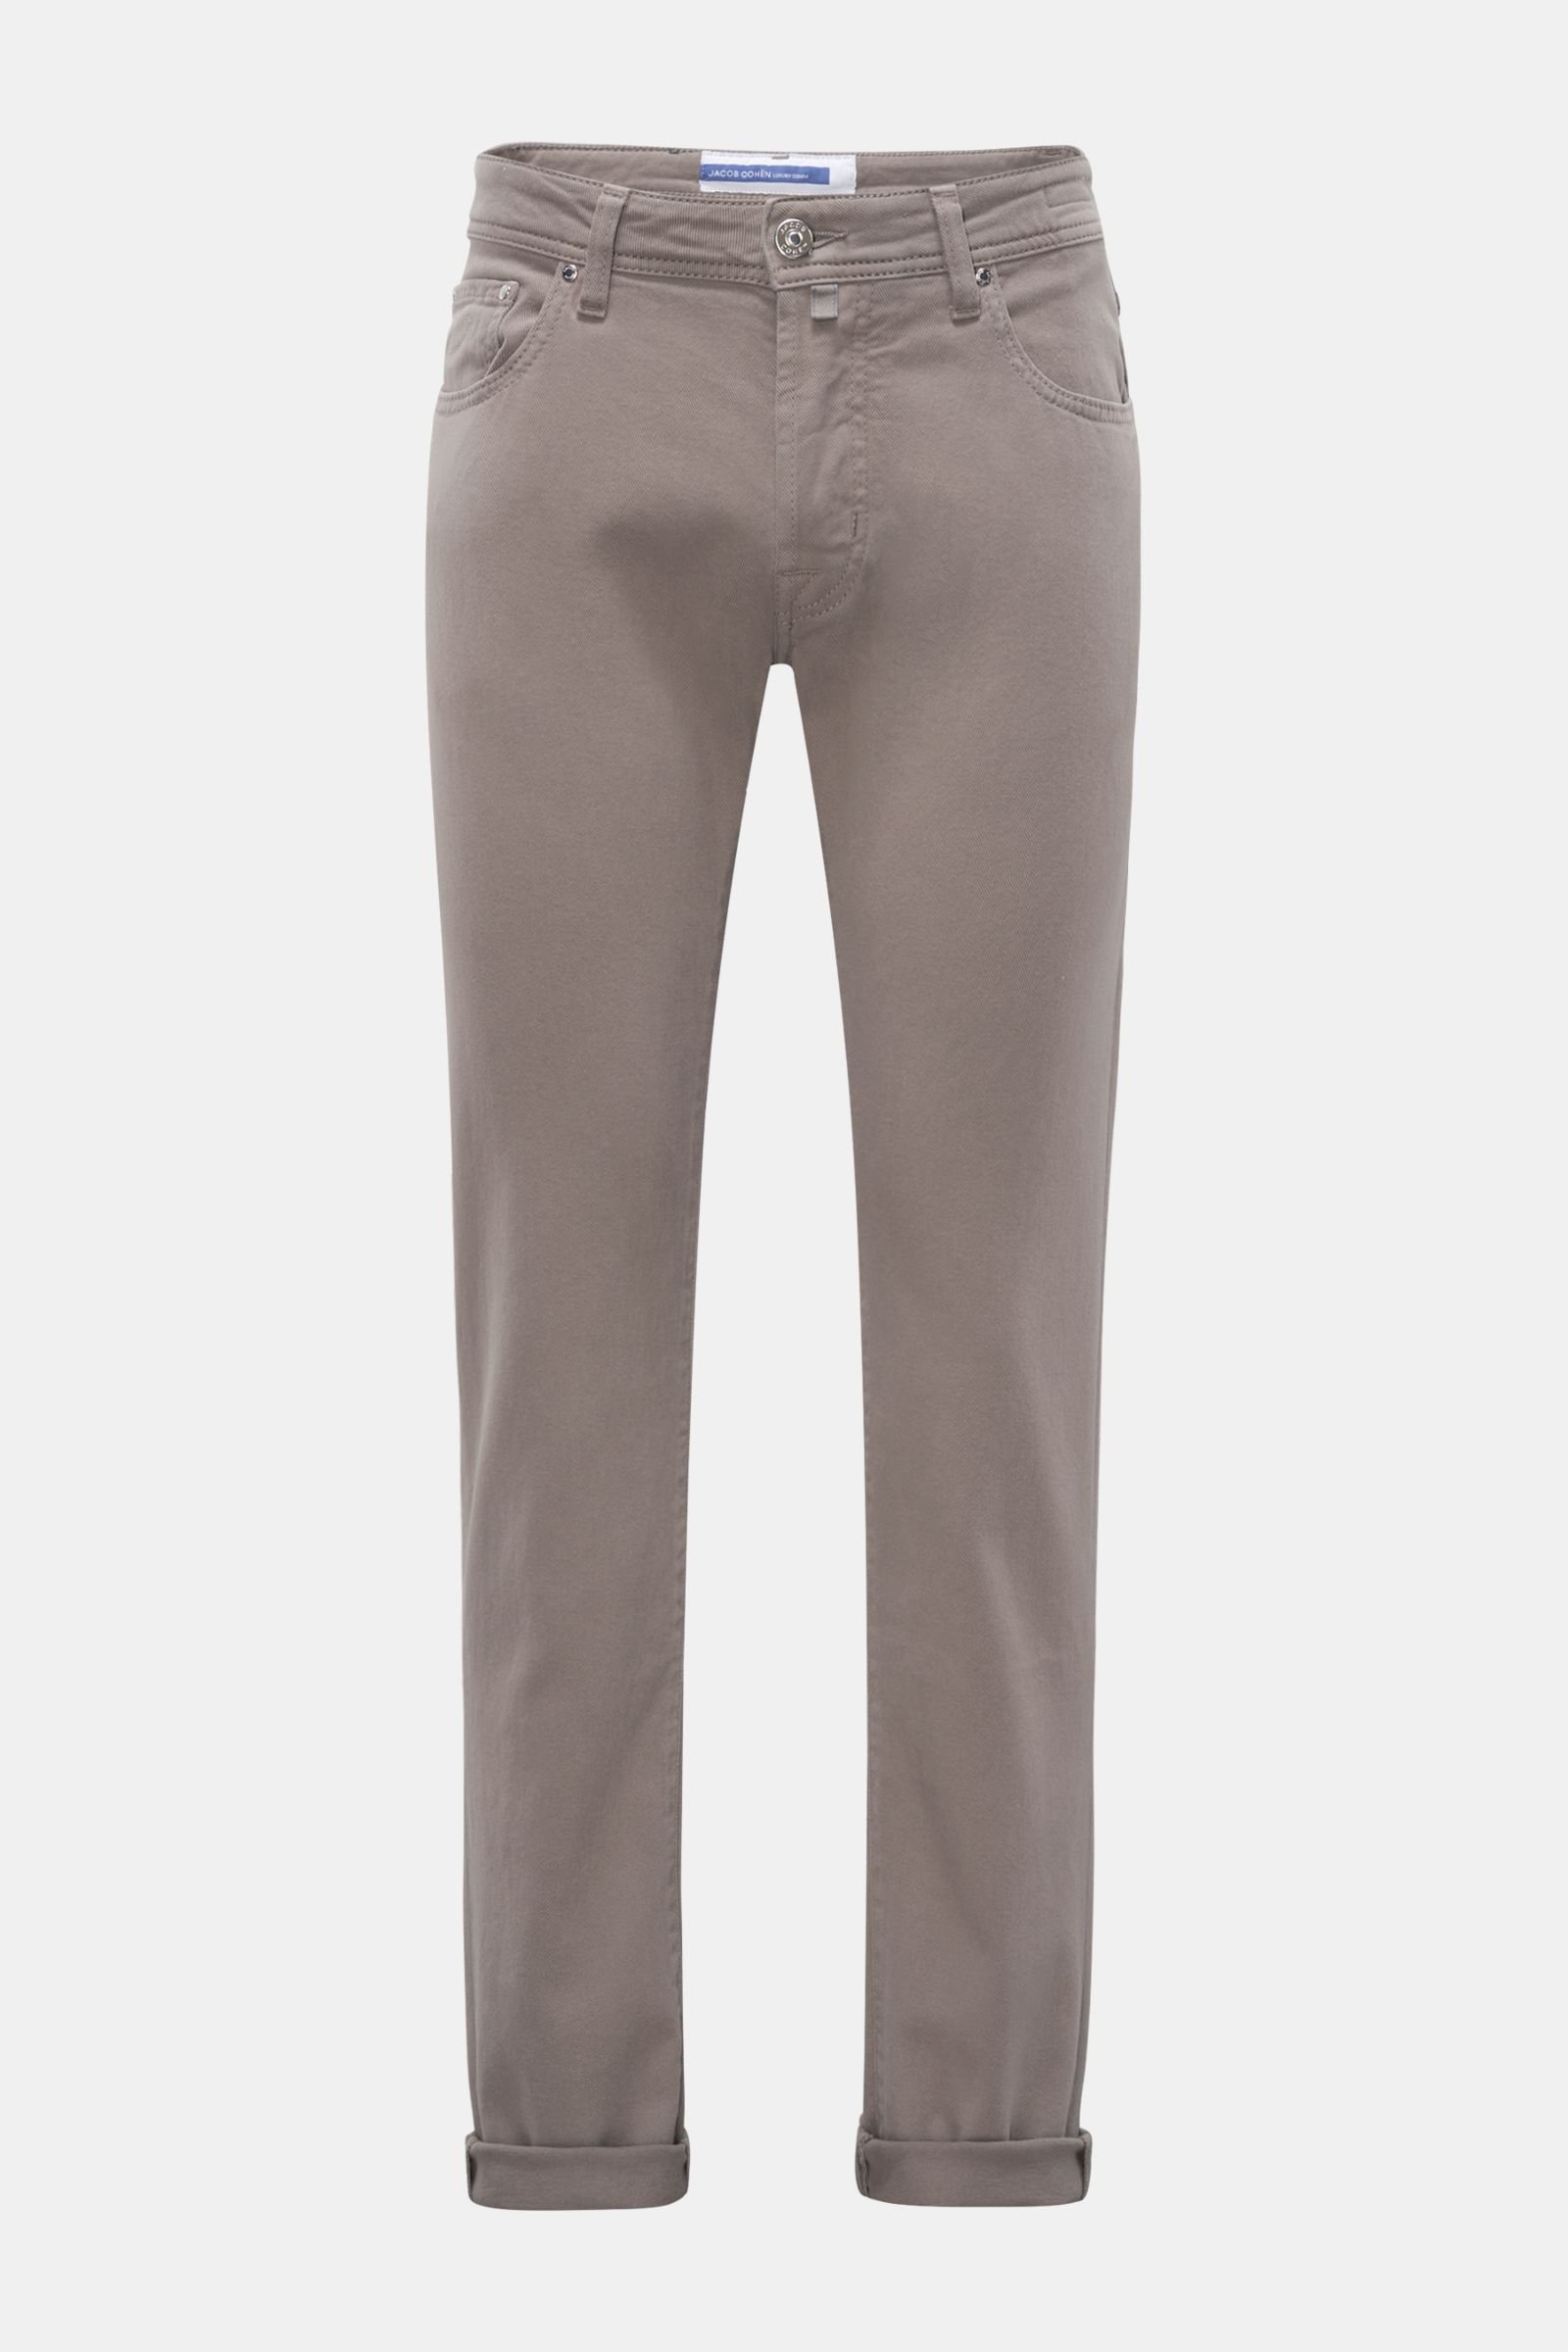 Jeans 'Bard' grey-brown (formerly J688)